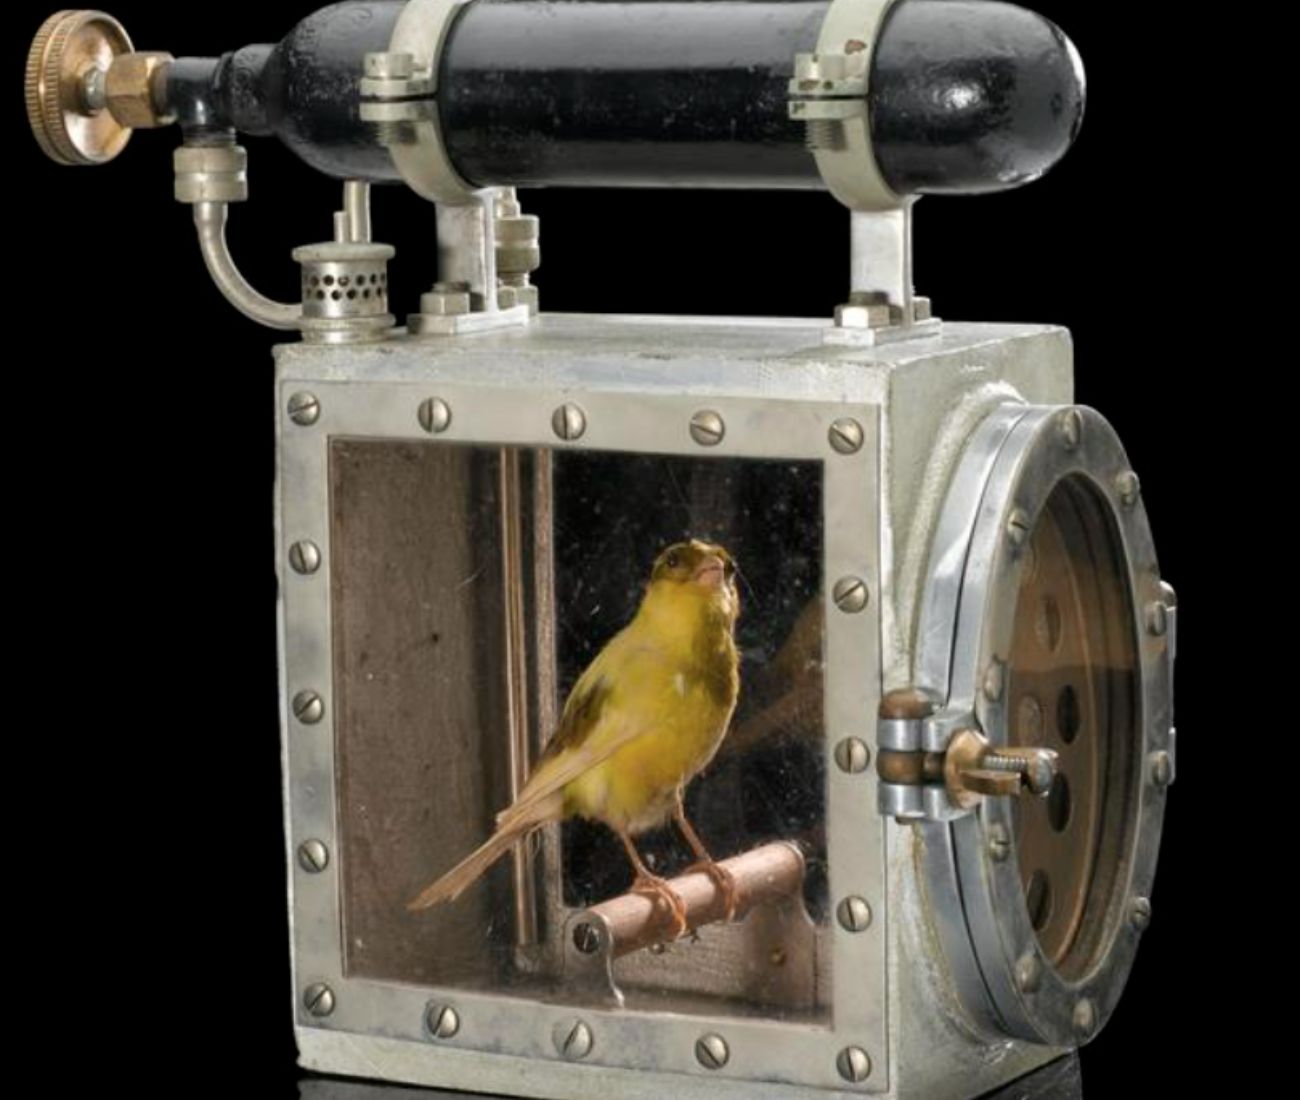  The device that revived canaries in coal mines warned of the peril 1